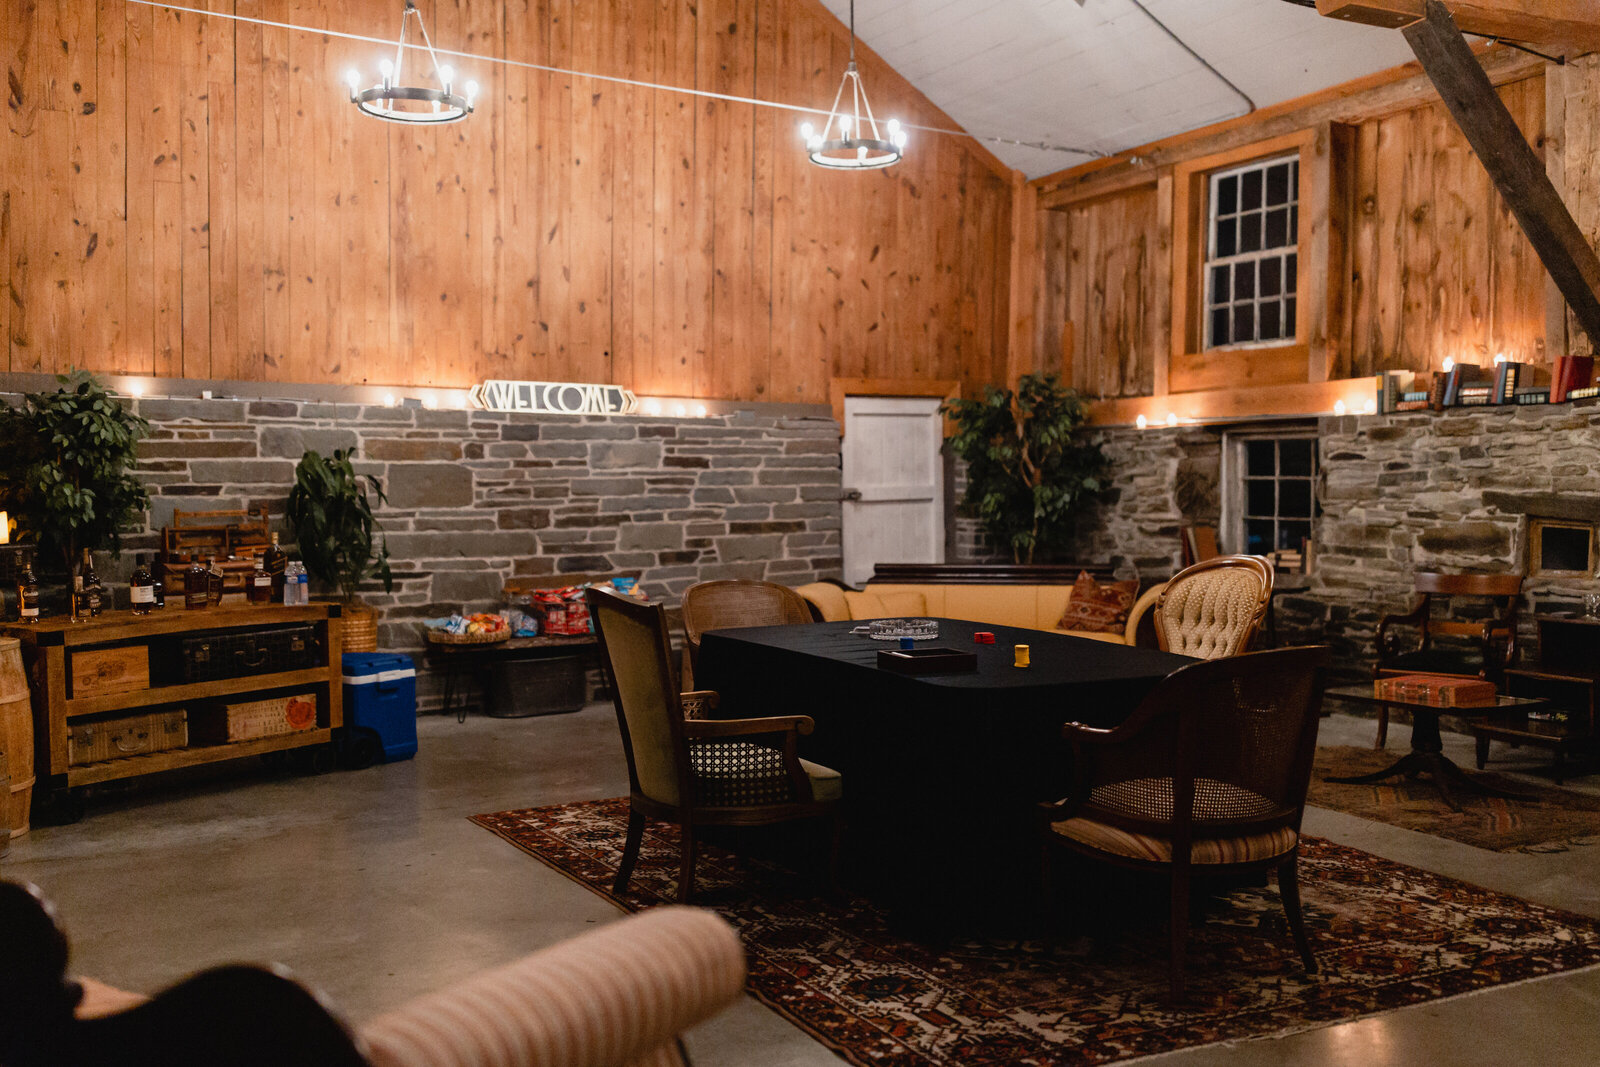 stone and wood barn with poker table and vintage furniture